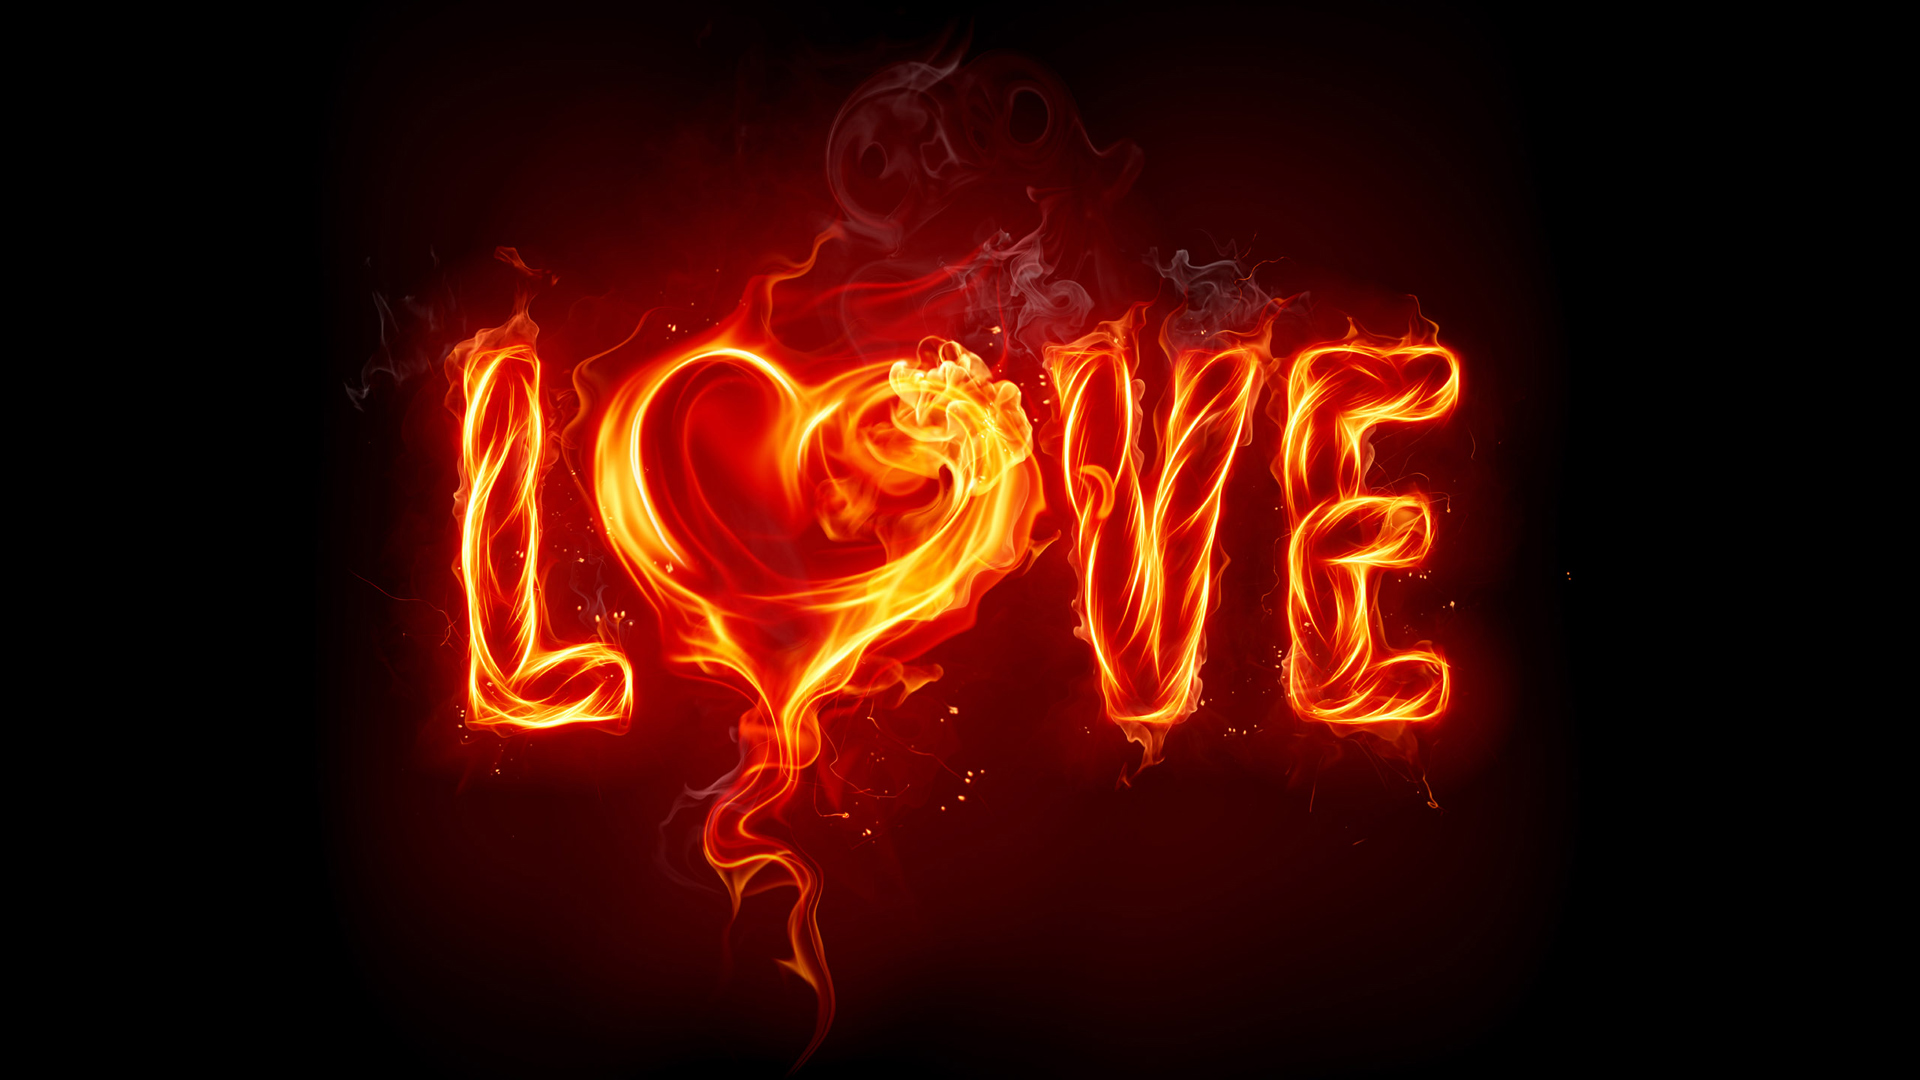 The Fiery Passion Of Love HD Wallpaper